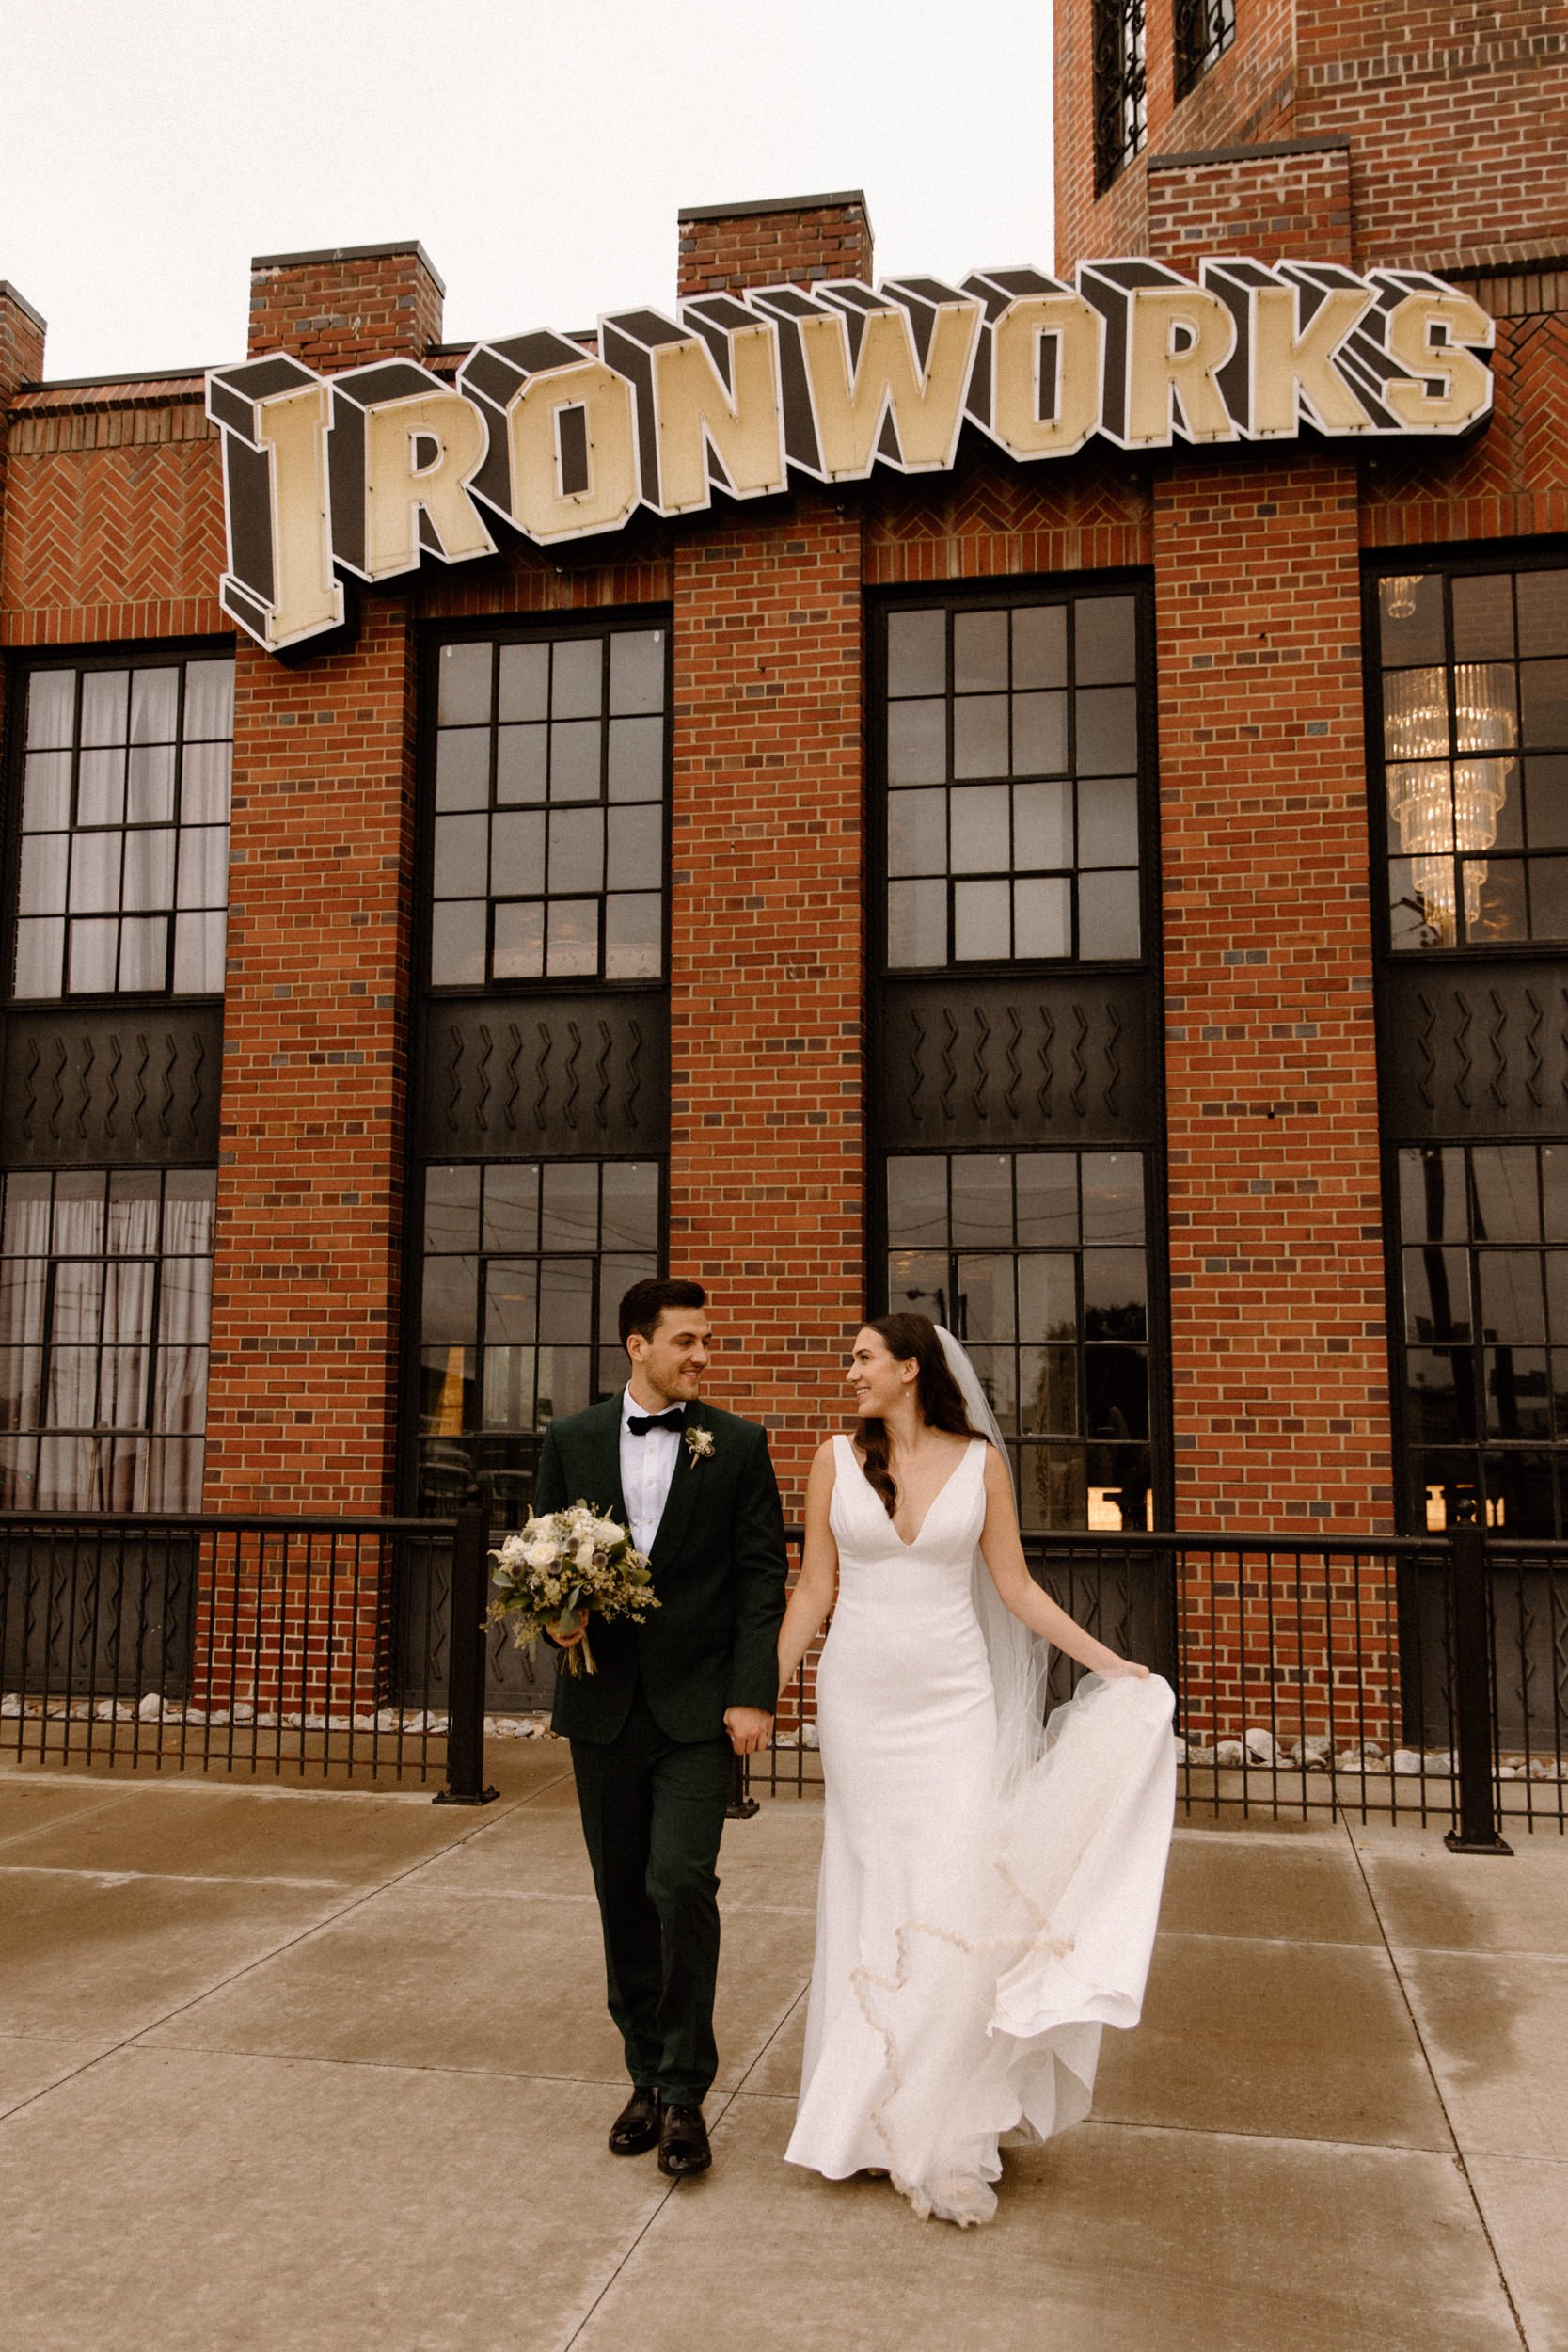 The bride and groom pose under the Ironworks sign in front of a brick building